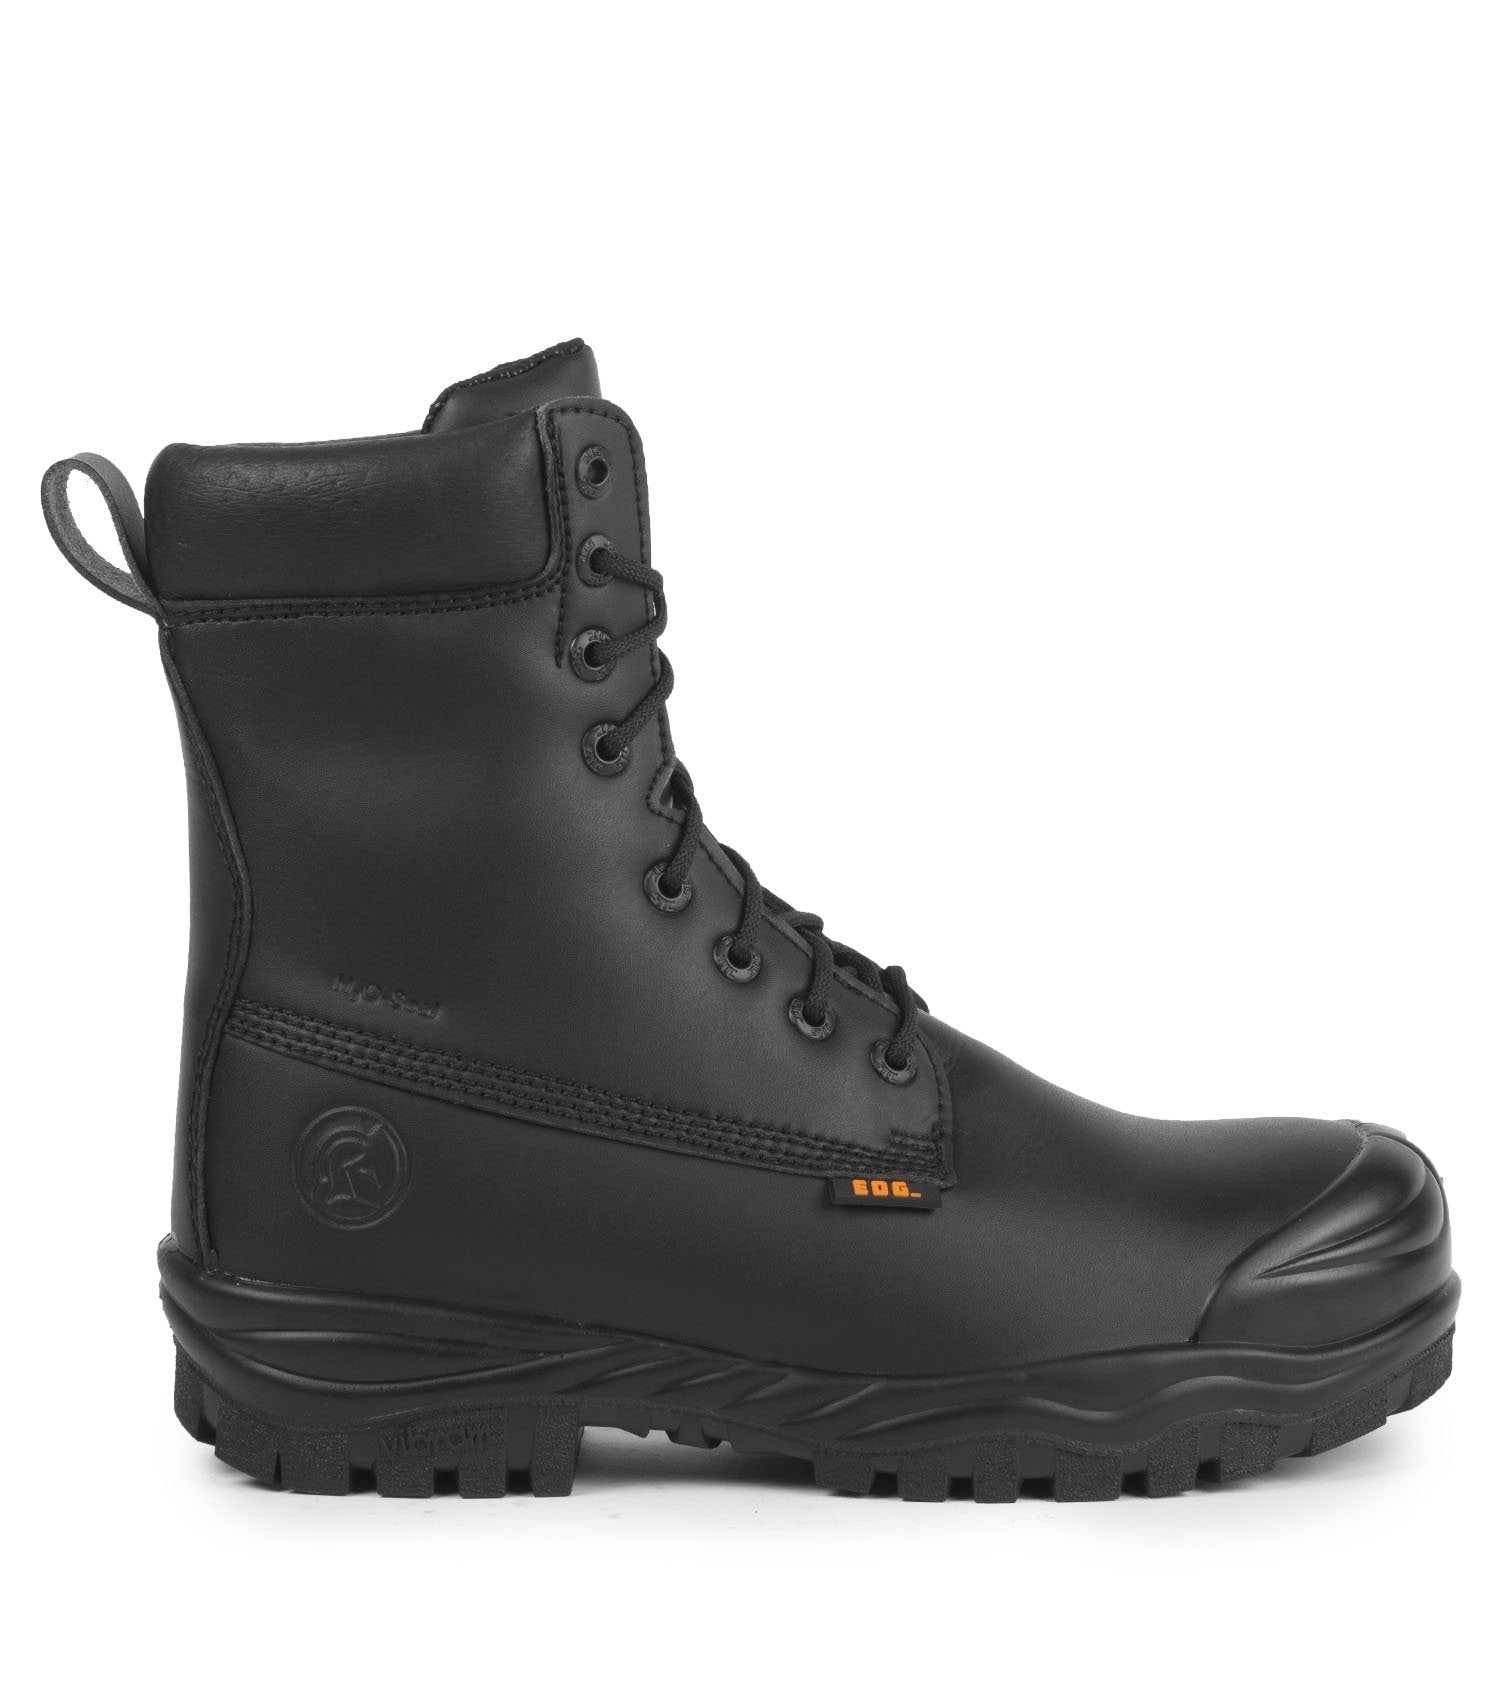 STC Maska 8" Composite Toe Safety Work Boot with Vibram® Fire & Ice Outsole | Black | Sizes 6 - 14 Work Boots - Cleanflow